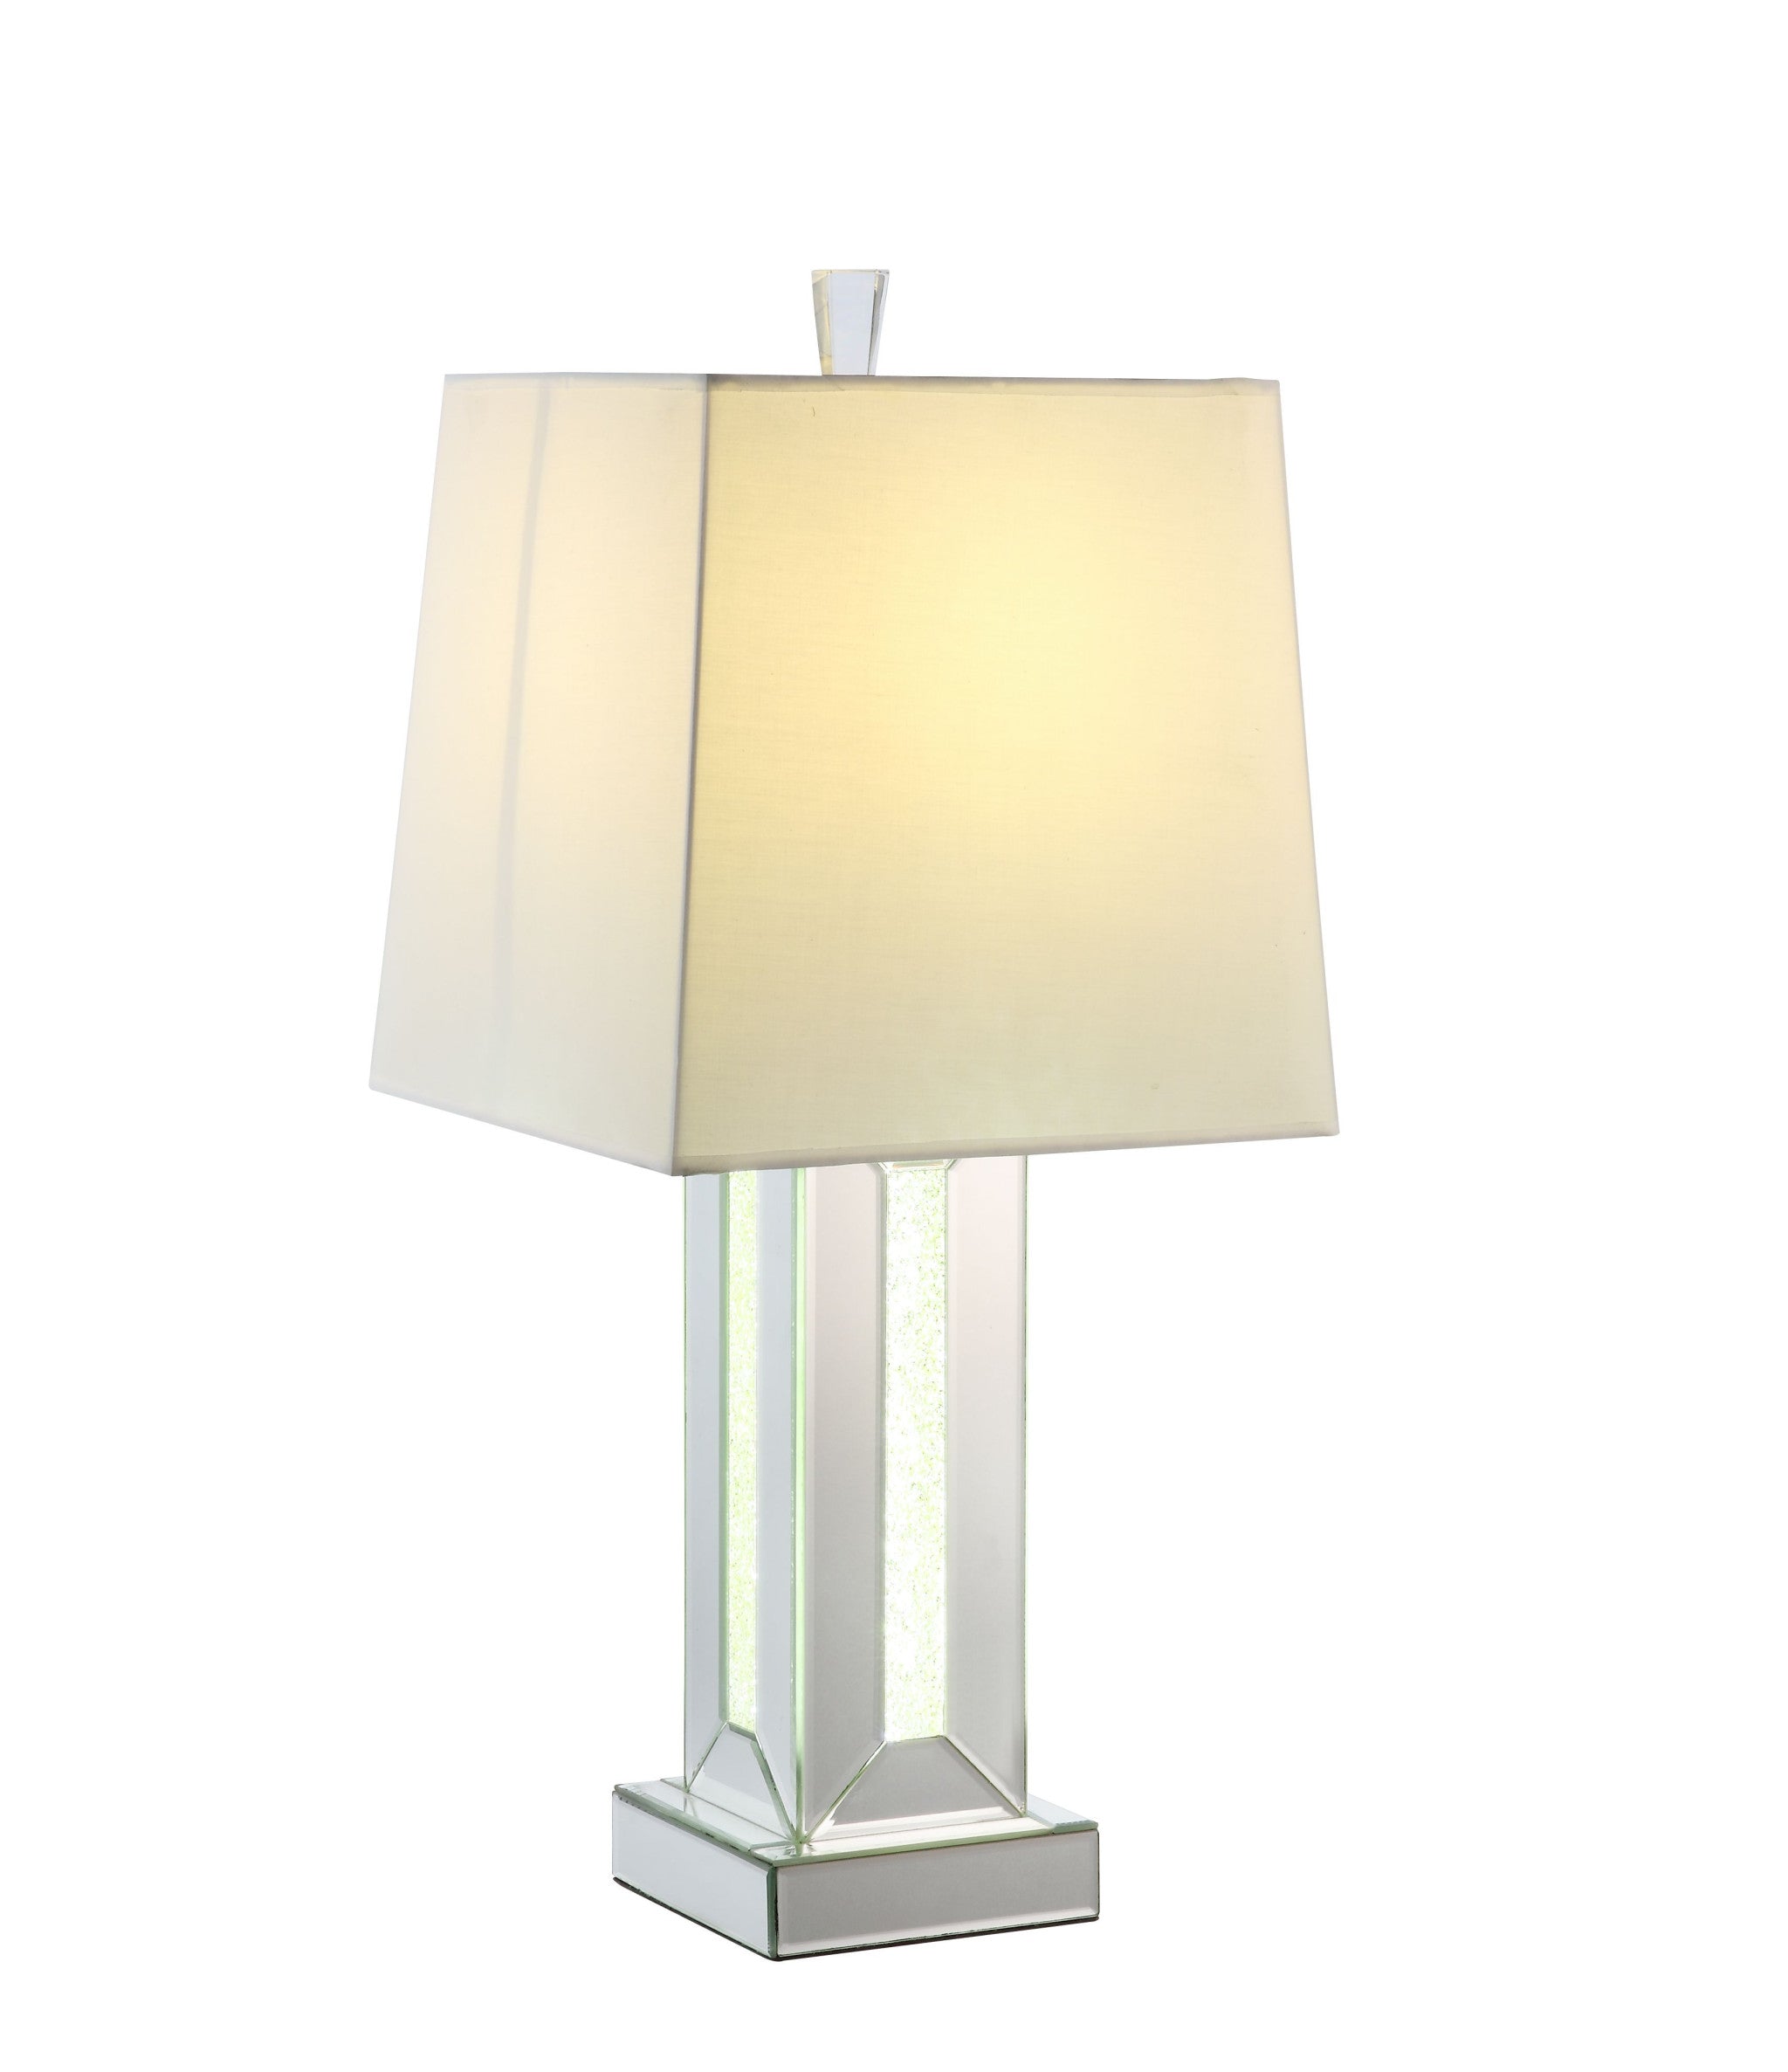 32" Mirrored Glass and Faux Crystal Table Lamp With White Square Shade